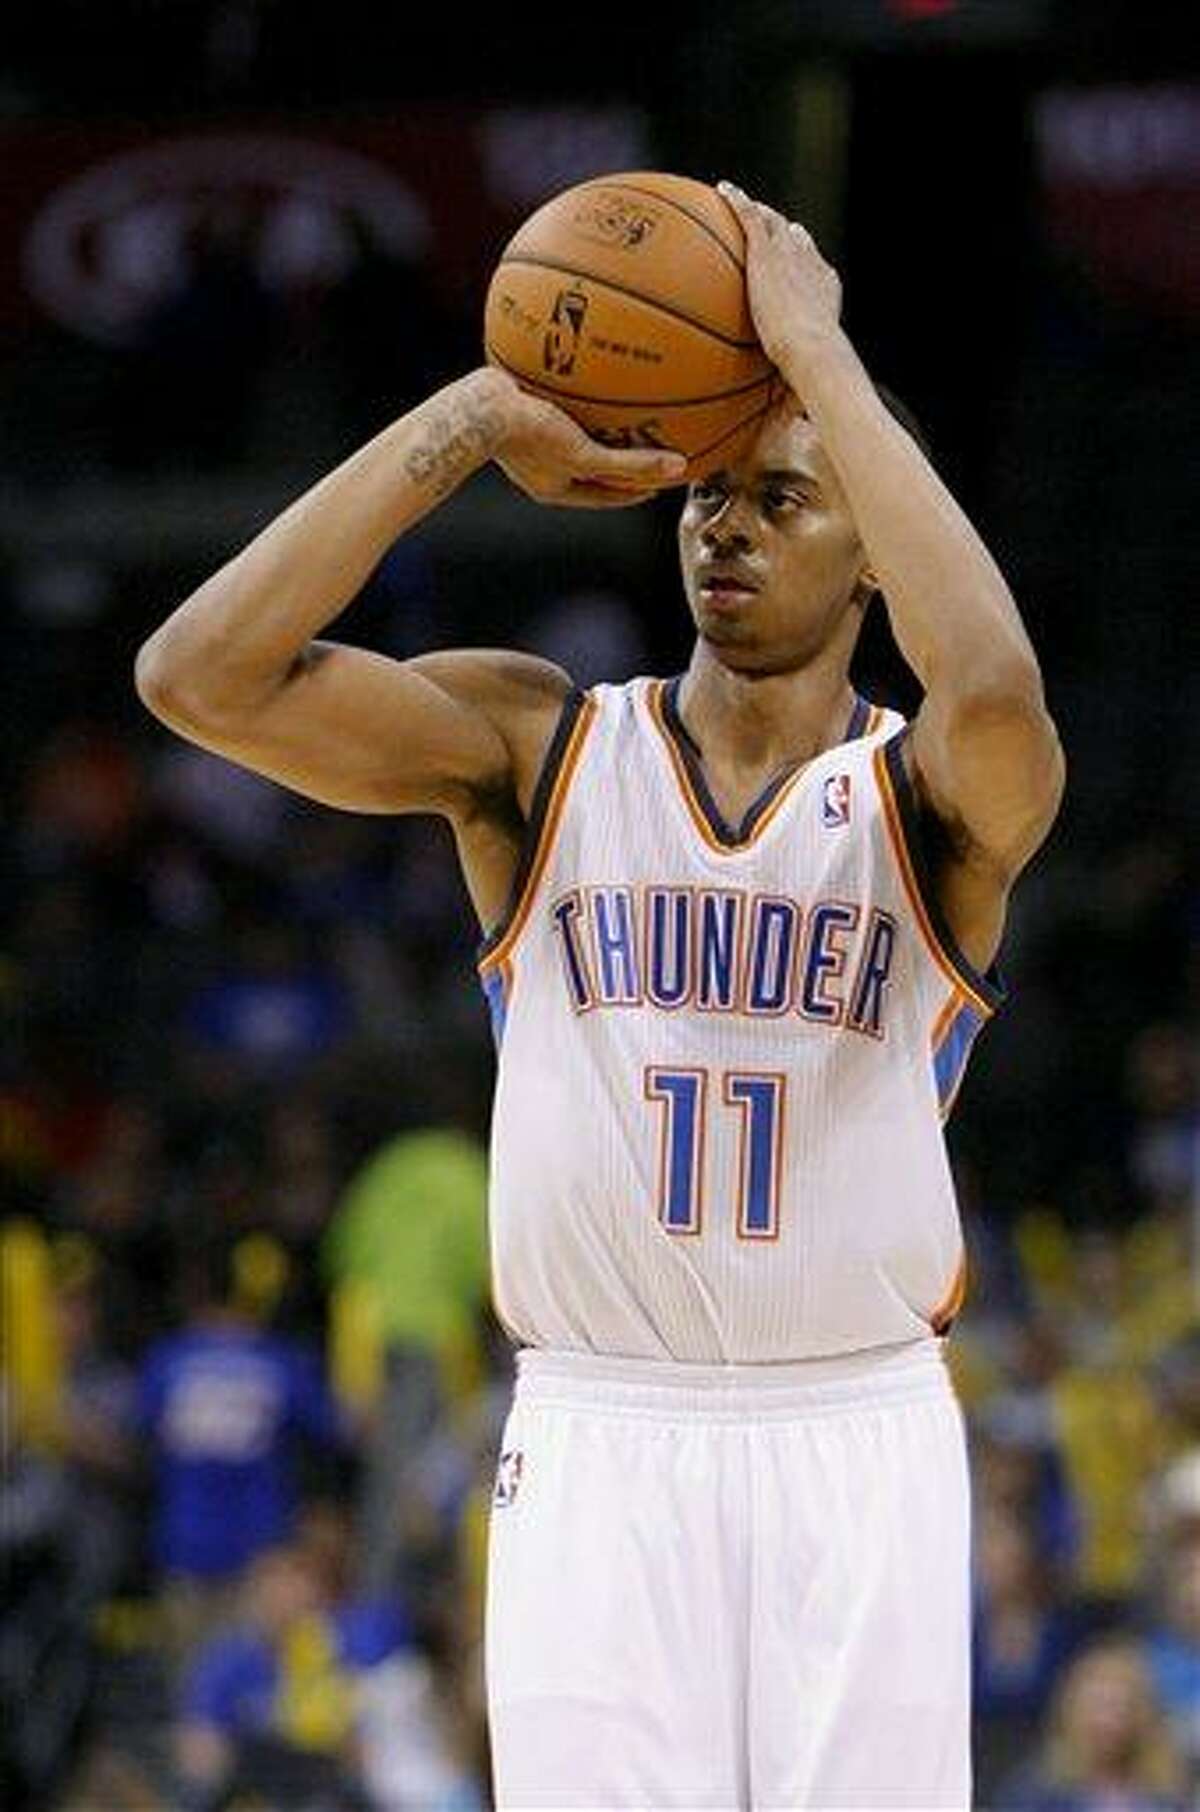 Oklahoma City Thunder shooting guard Jeremy Lamb (11) lines up his shot against the Toronto Raptors in the fourth quarter of an NBA basketball game in Oklahoma City, Tuesday, Nov. 6, 2012. Oklahoma City won 108-88. (AP Photo/Alonzo Adams)